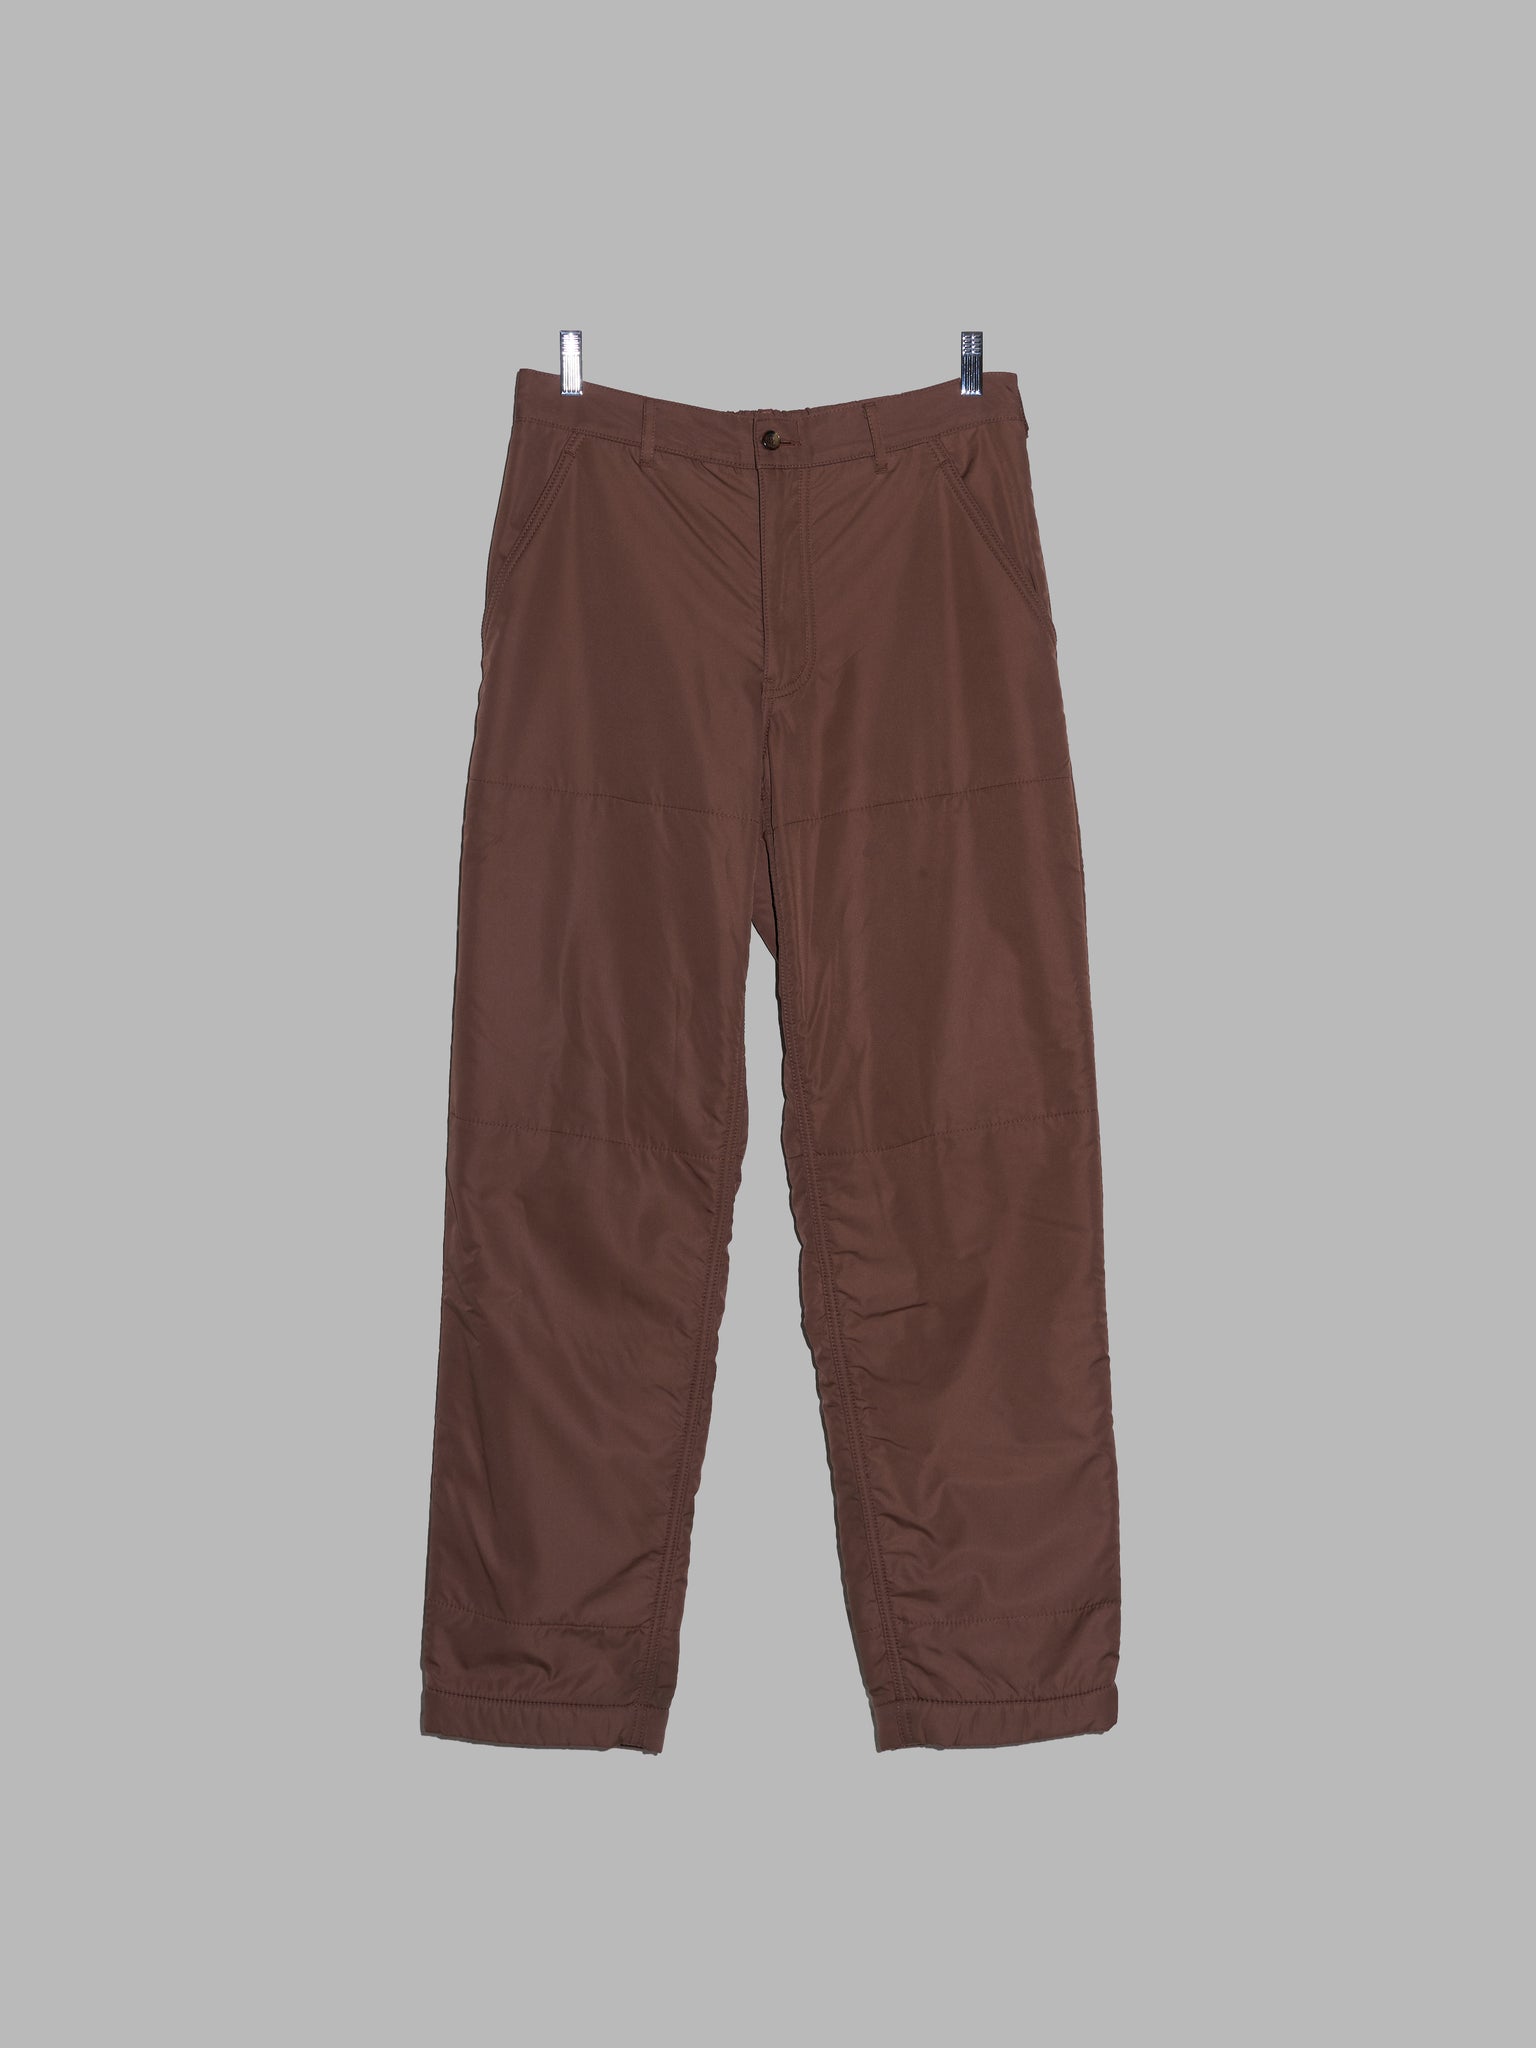 Comme des Garcons Homme Plus AW2005 brown trousers with orange fleece lining - M